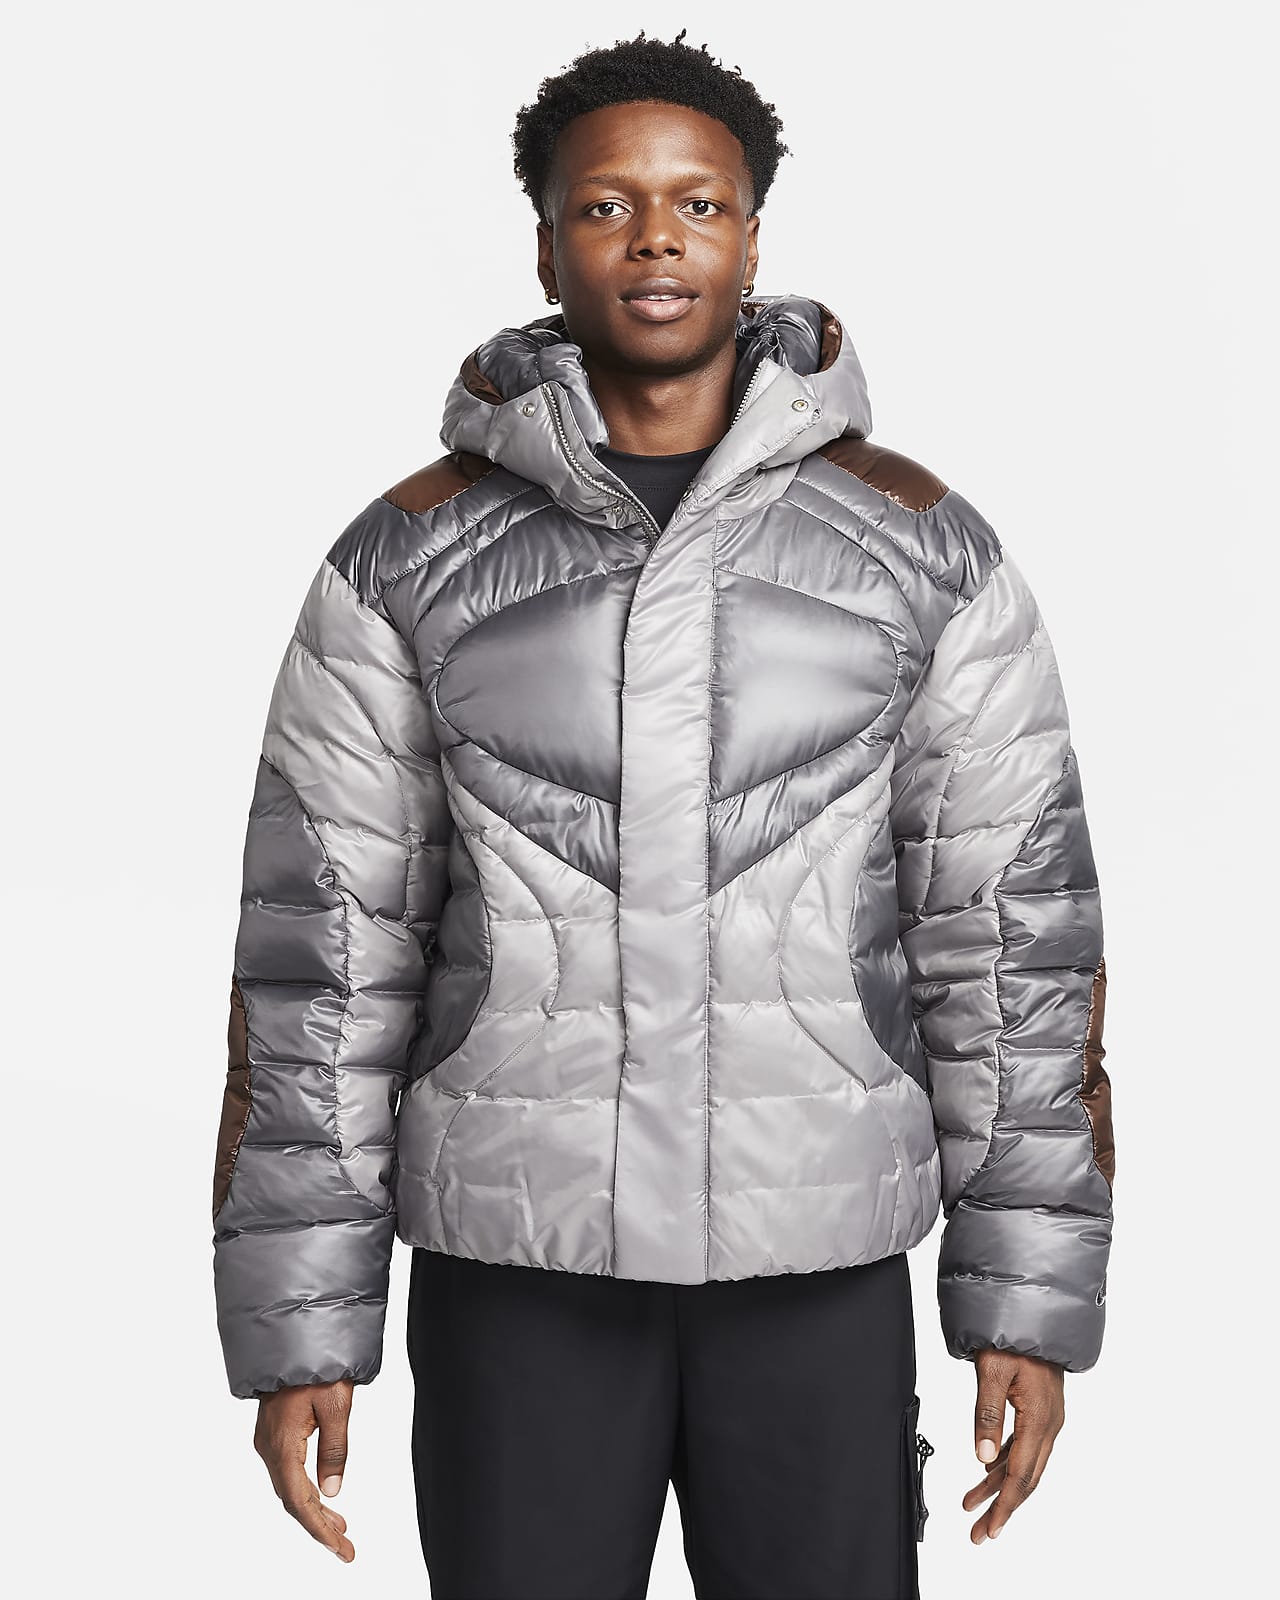 https://static.nike.com/a/images/t_PDP_1280_v1/f_auto,q_auto:eco/68f75d4e-3641-44ef-958d-af4e839b7784/sportswear-tech-pack-adv-oversized-water-repellent-hooded-jacket-ntVJPj.png